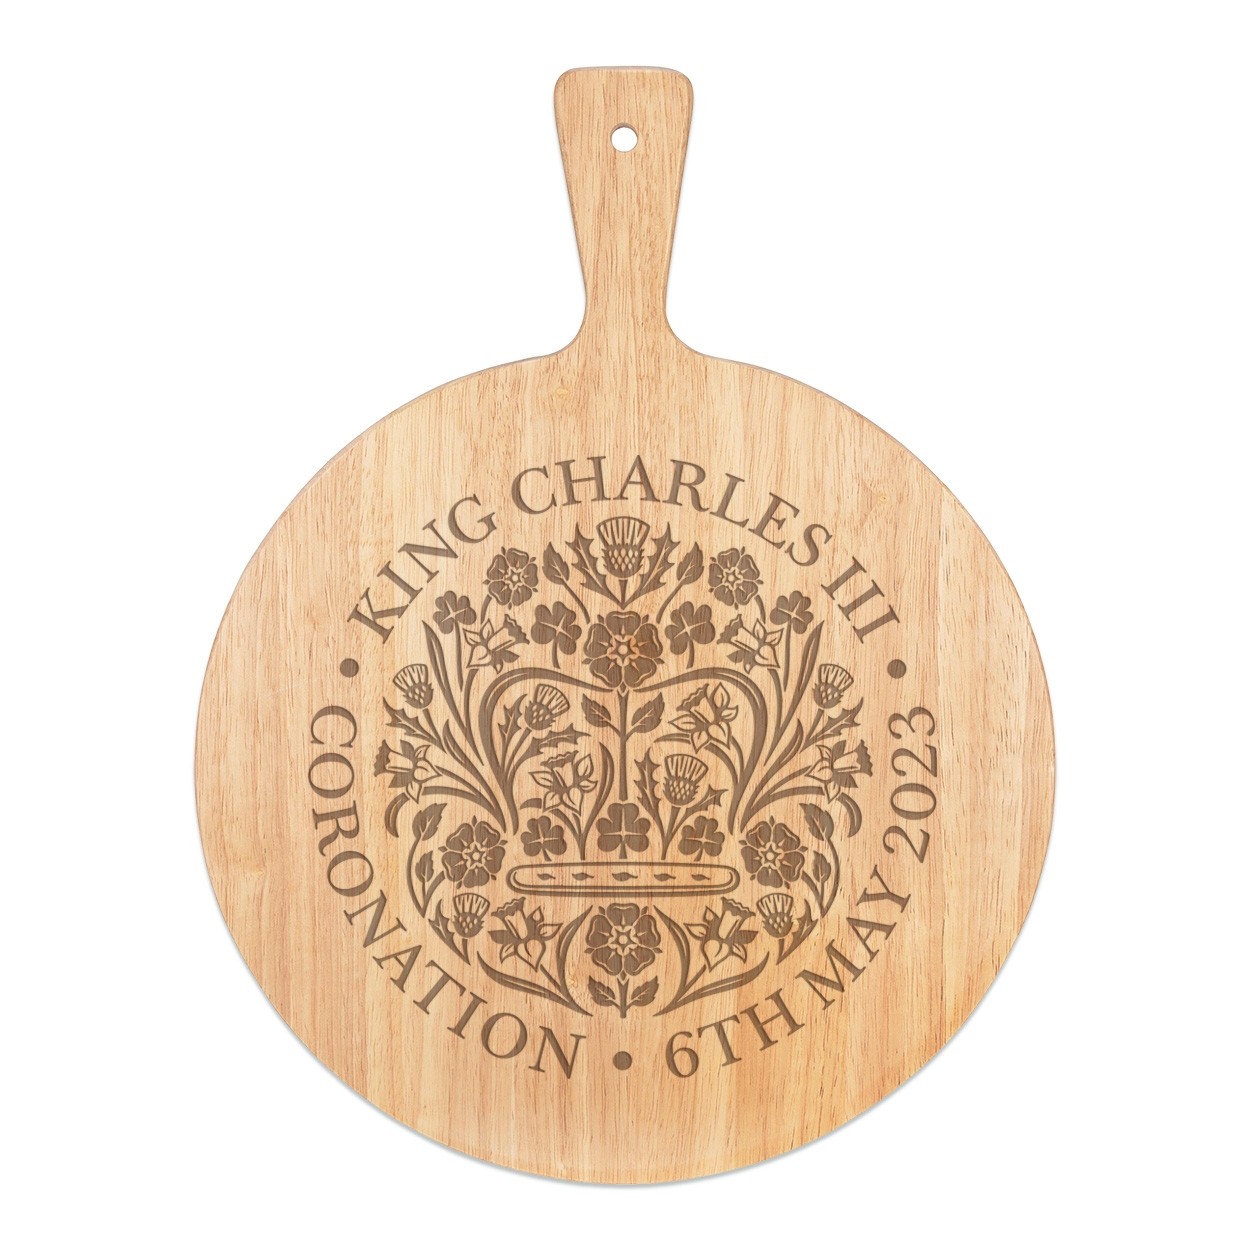 Coronation Emblem King Charles III Pizza Board Paddle Serving Tray Handle Round Wooden 45x34cm King's Commemorative Gift Souvenir